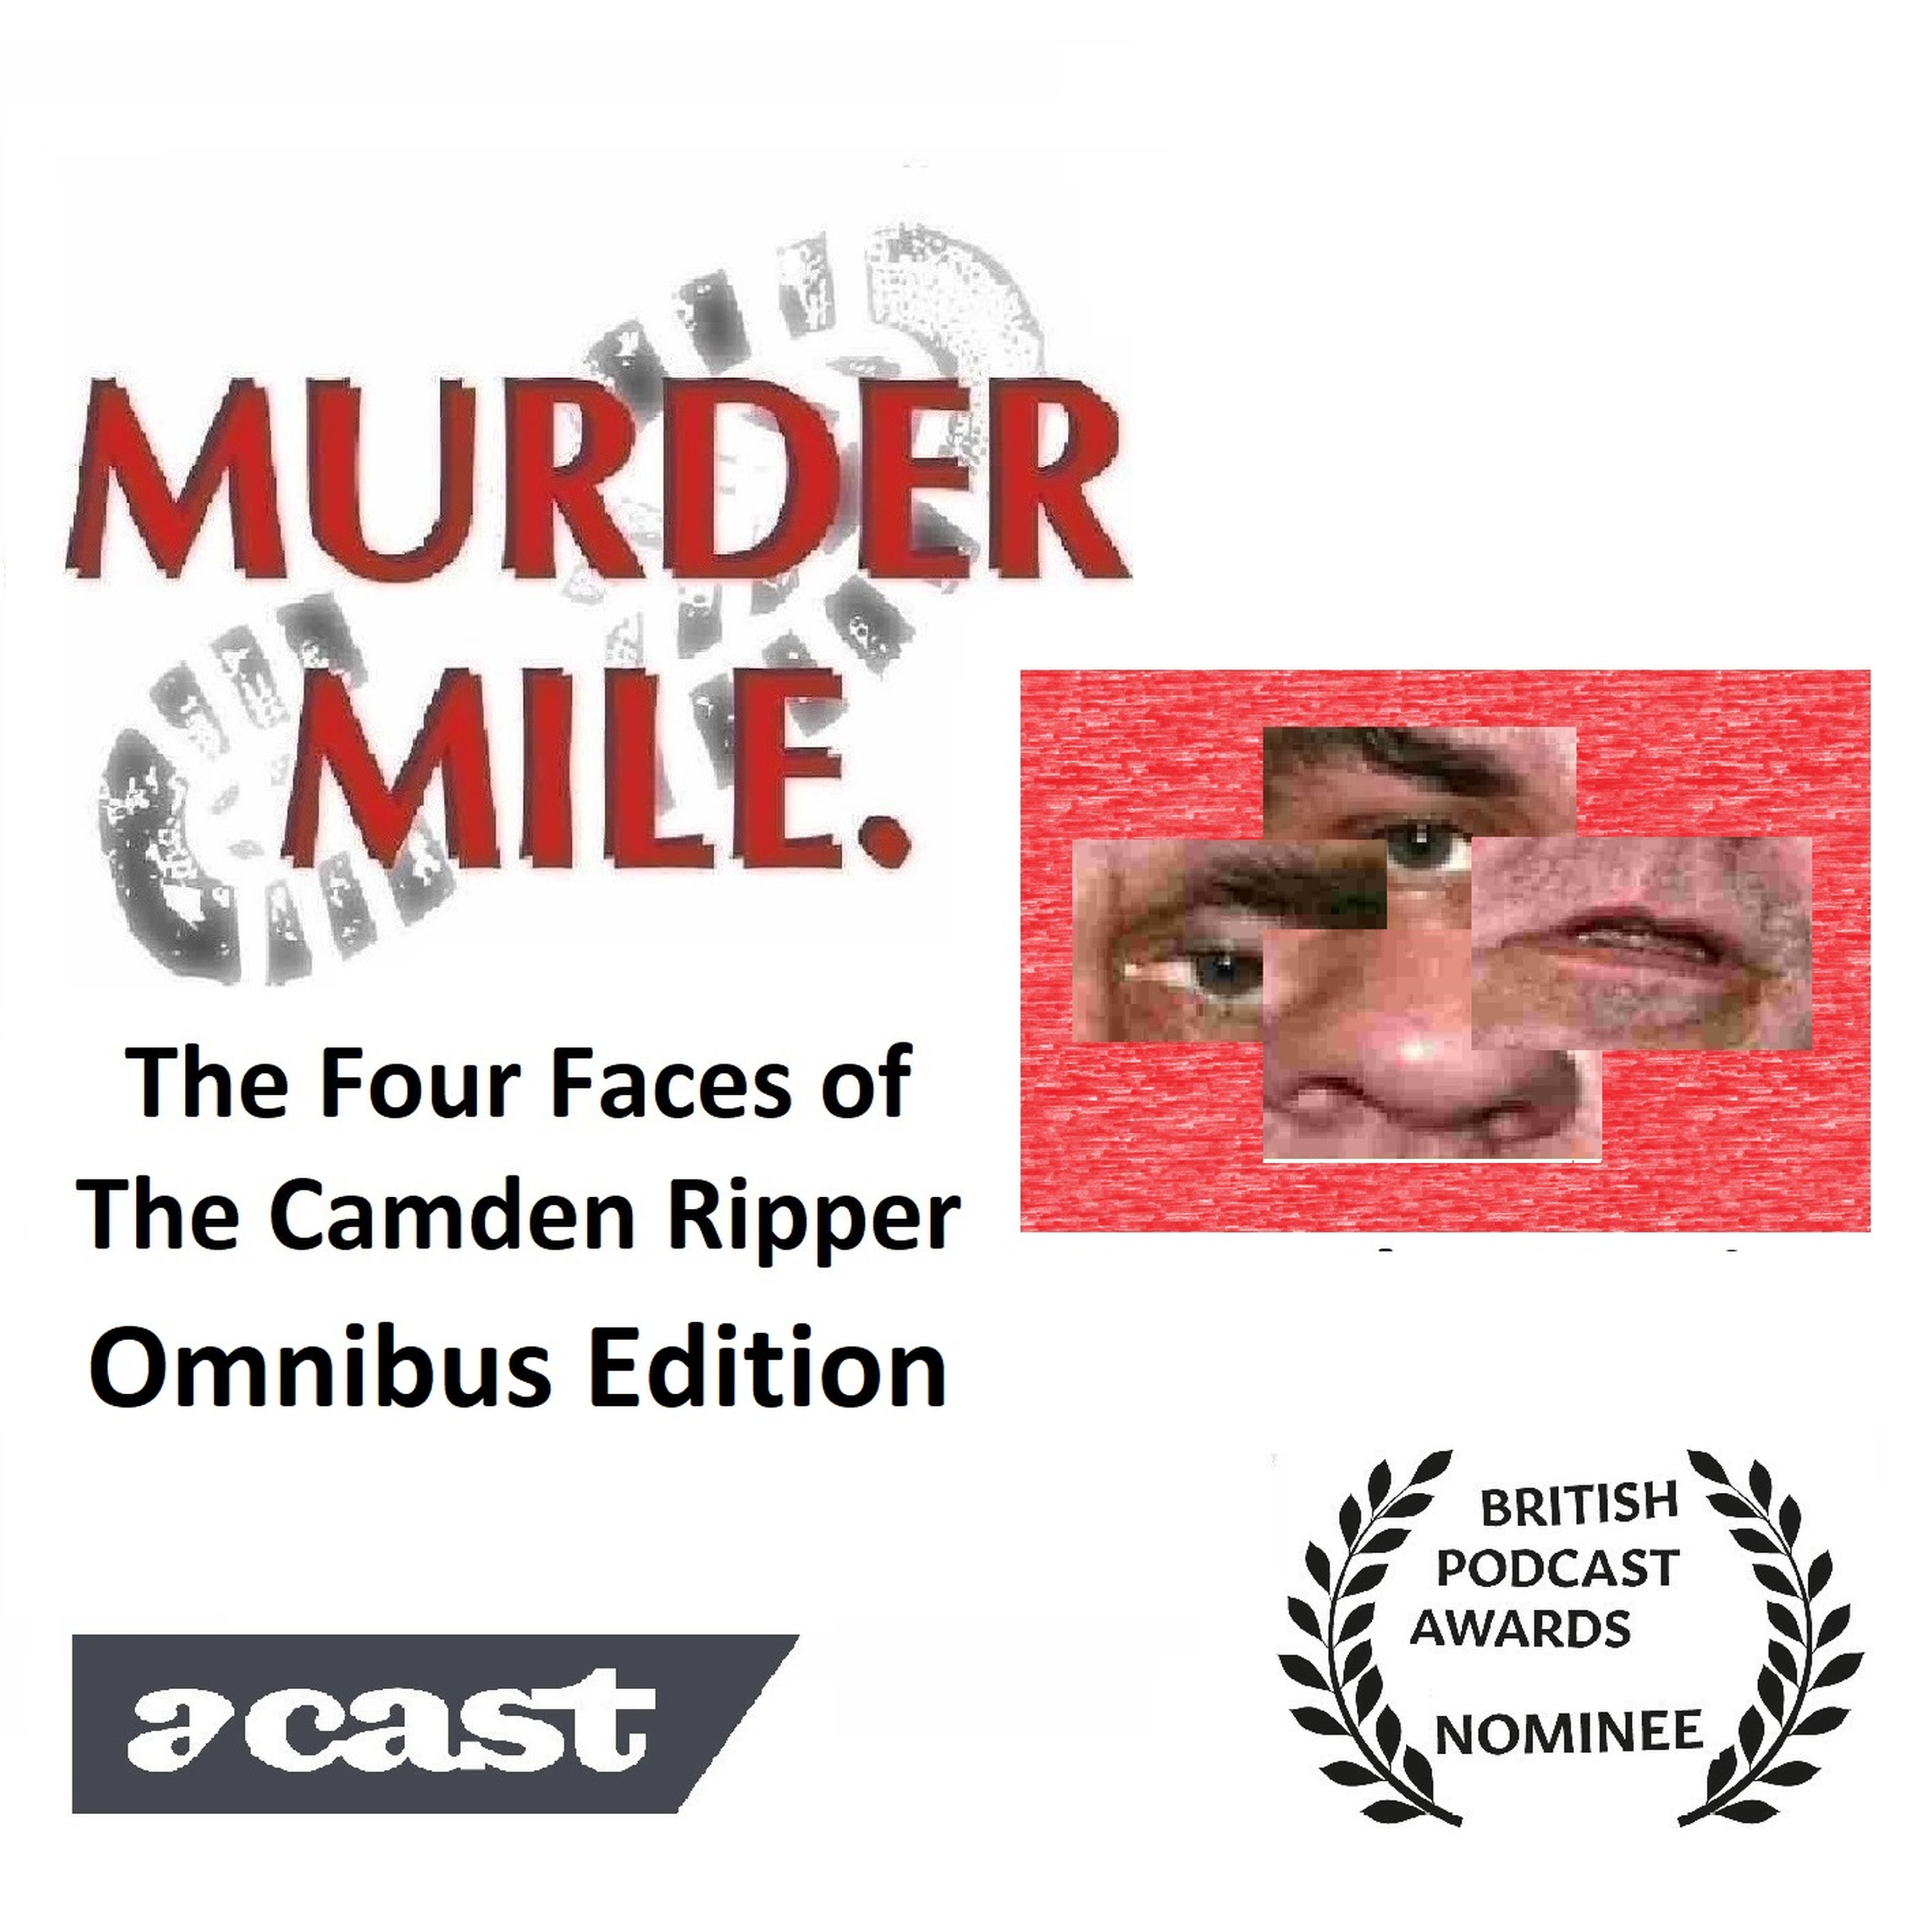 The Four Faces of The Camden Ripper - Omnibus Edition